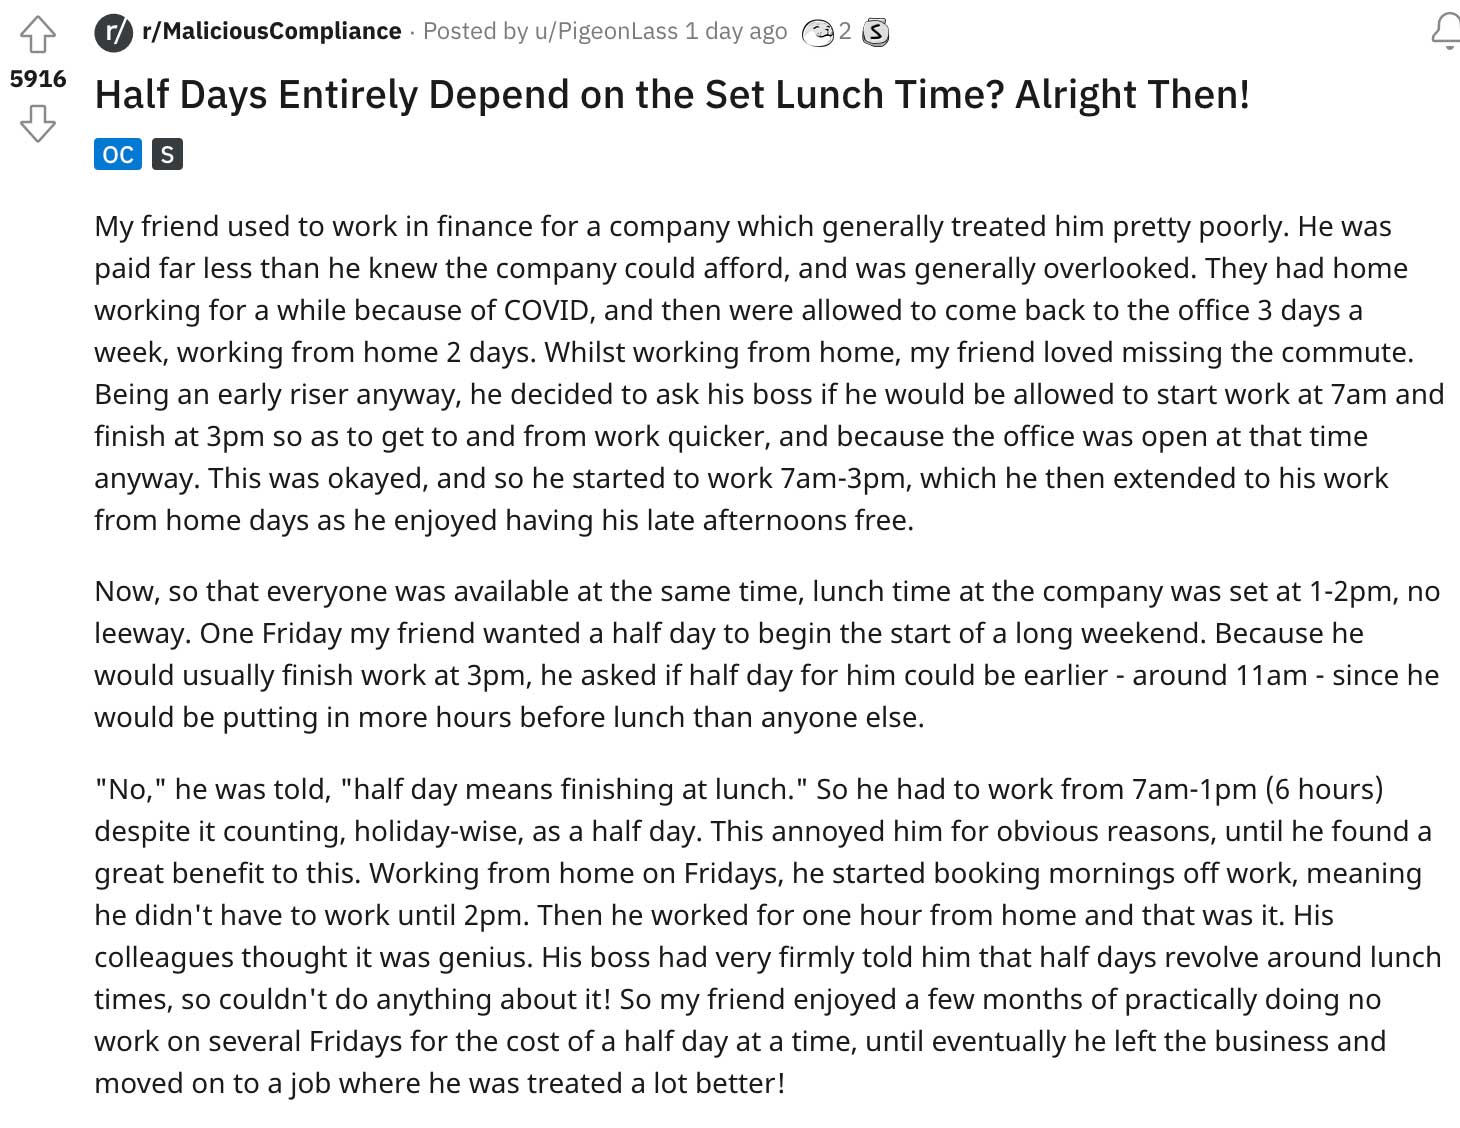 Malicious Compliance - Half Days Entirely Depend on the Set Lunch Time? Alright Then! 3 Oc S My friend used to work in finance for a company which generally treated him pretty poorly. He was paid far l